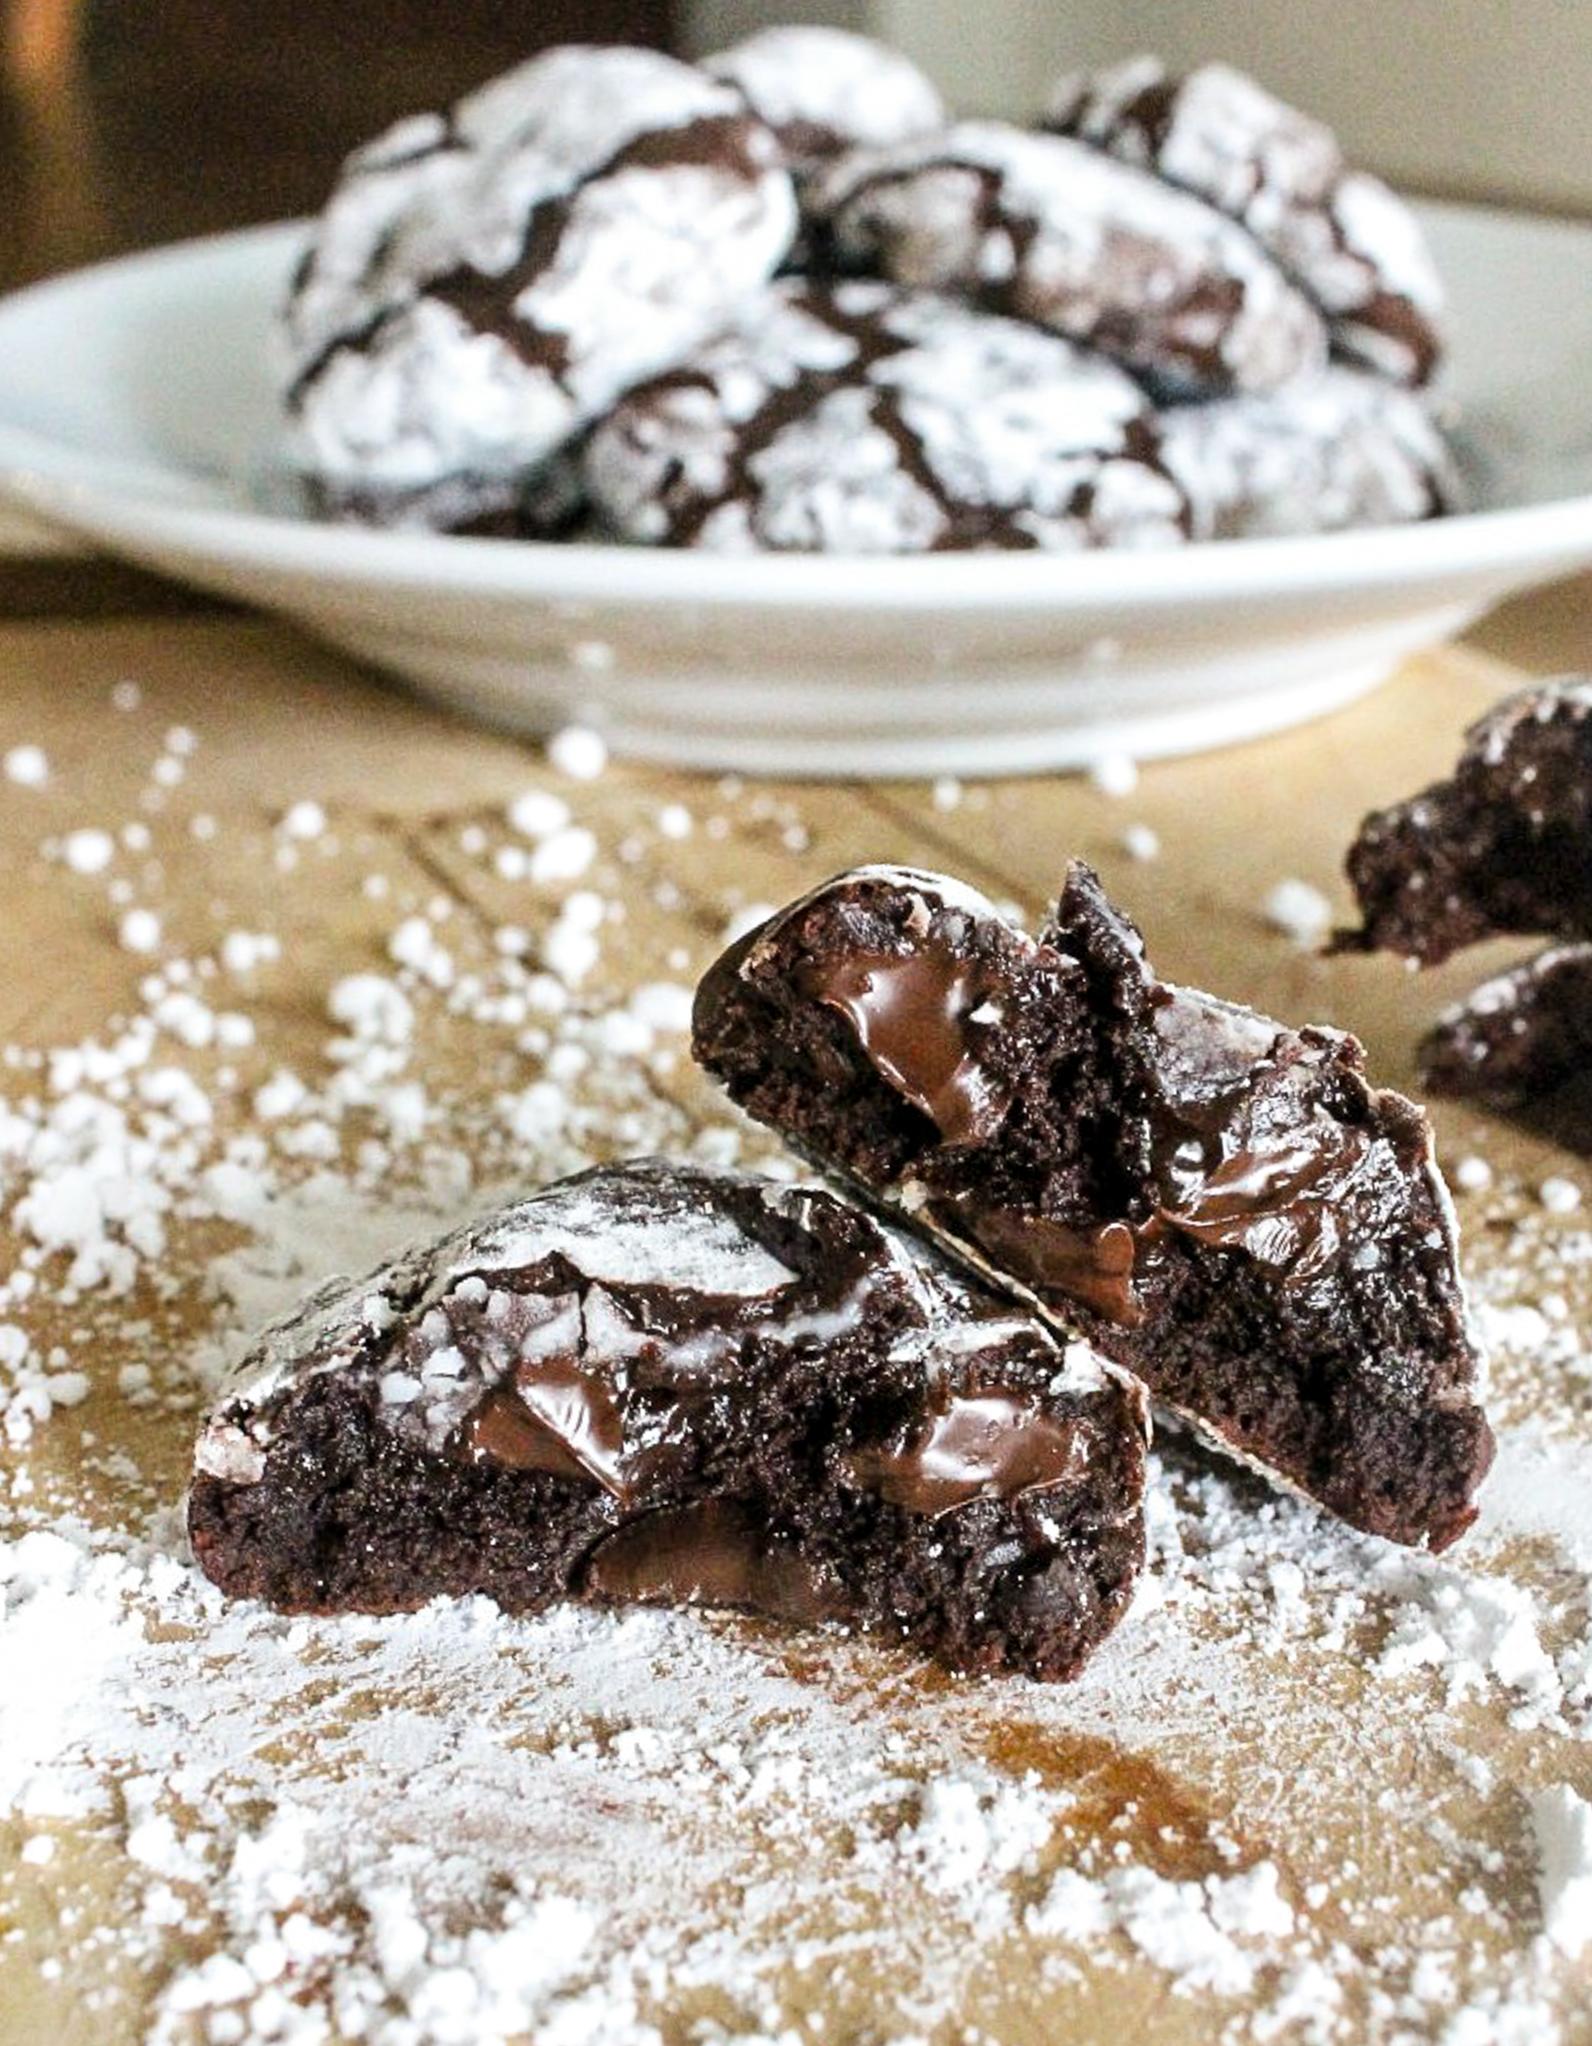  Baked to perfection, these cookies have a crispy exterior and a soft, chewy center.